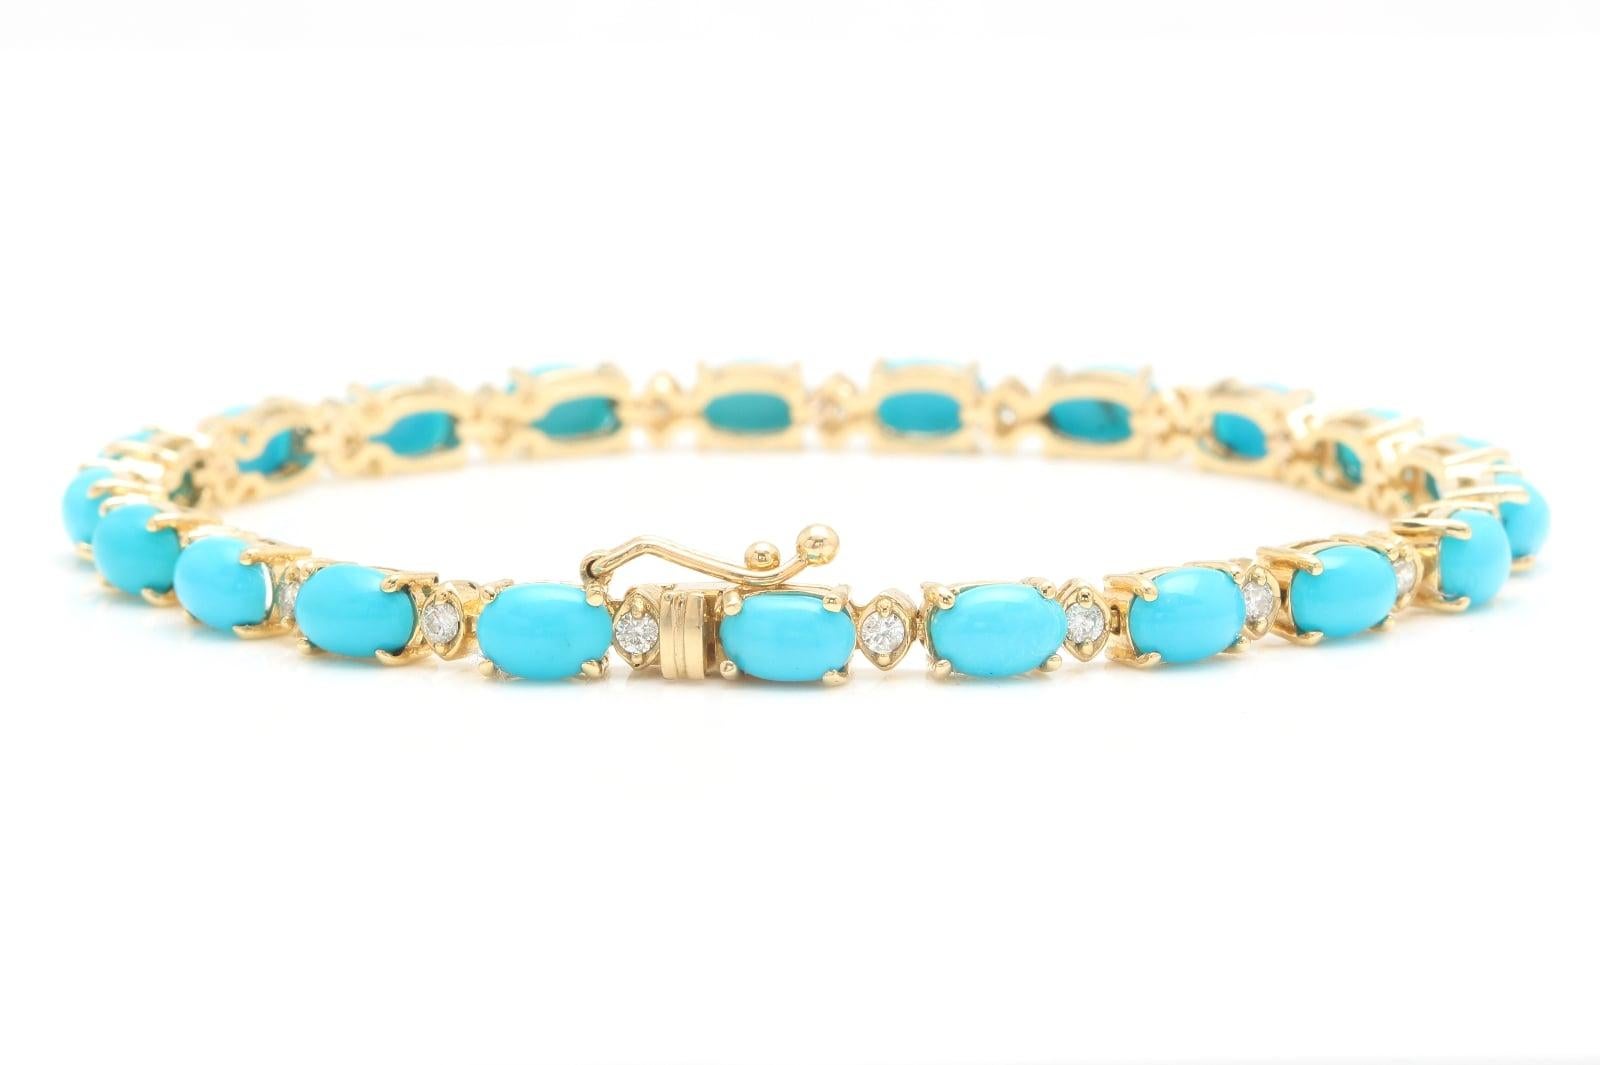 Very Impressive 11.60 Carats Natural Turquoise & Diamond 14K Solid Yellow Gold Bracelet 

Suggested Replacement Value: $6,500.00

STAMPED: 14K

Total Natural Round Diamonds Weight: Approx. 0.60 Carats (color G-H / Clarity SI1-Si2)

Total Natural